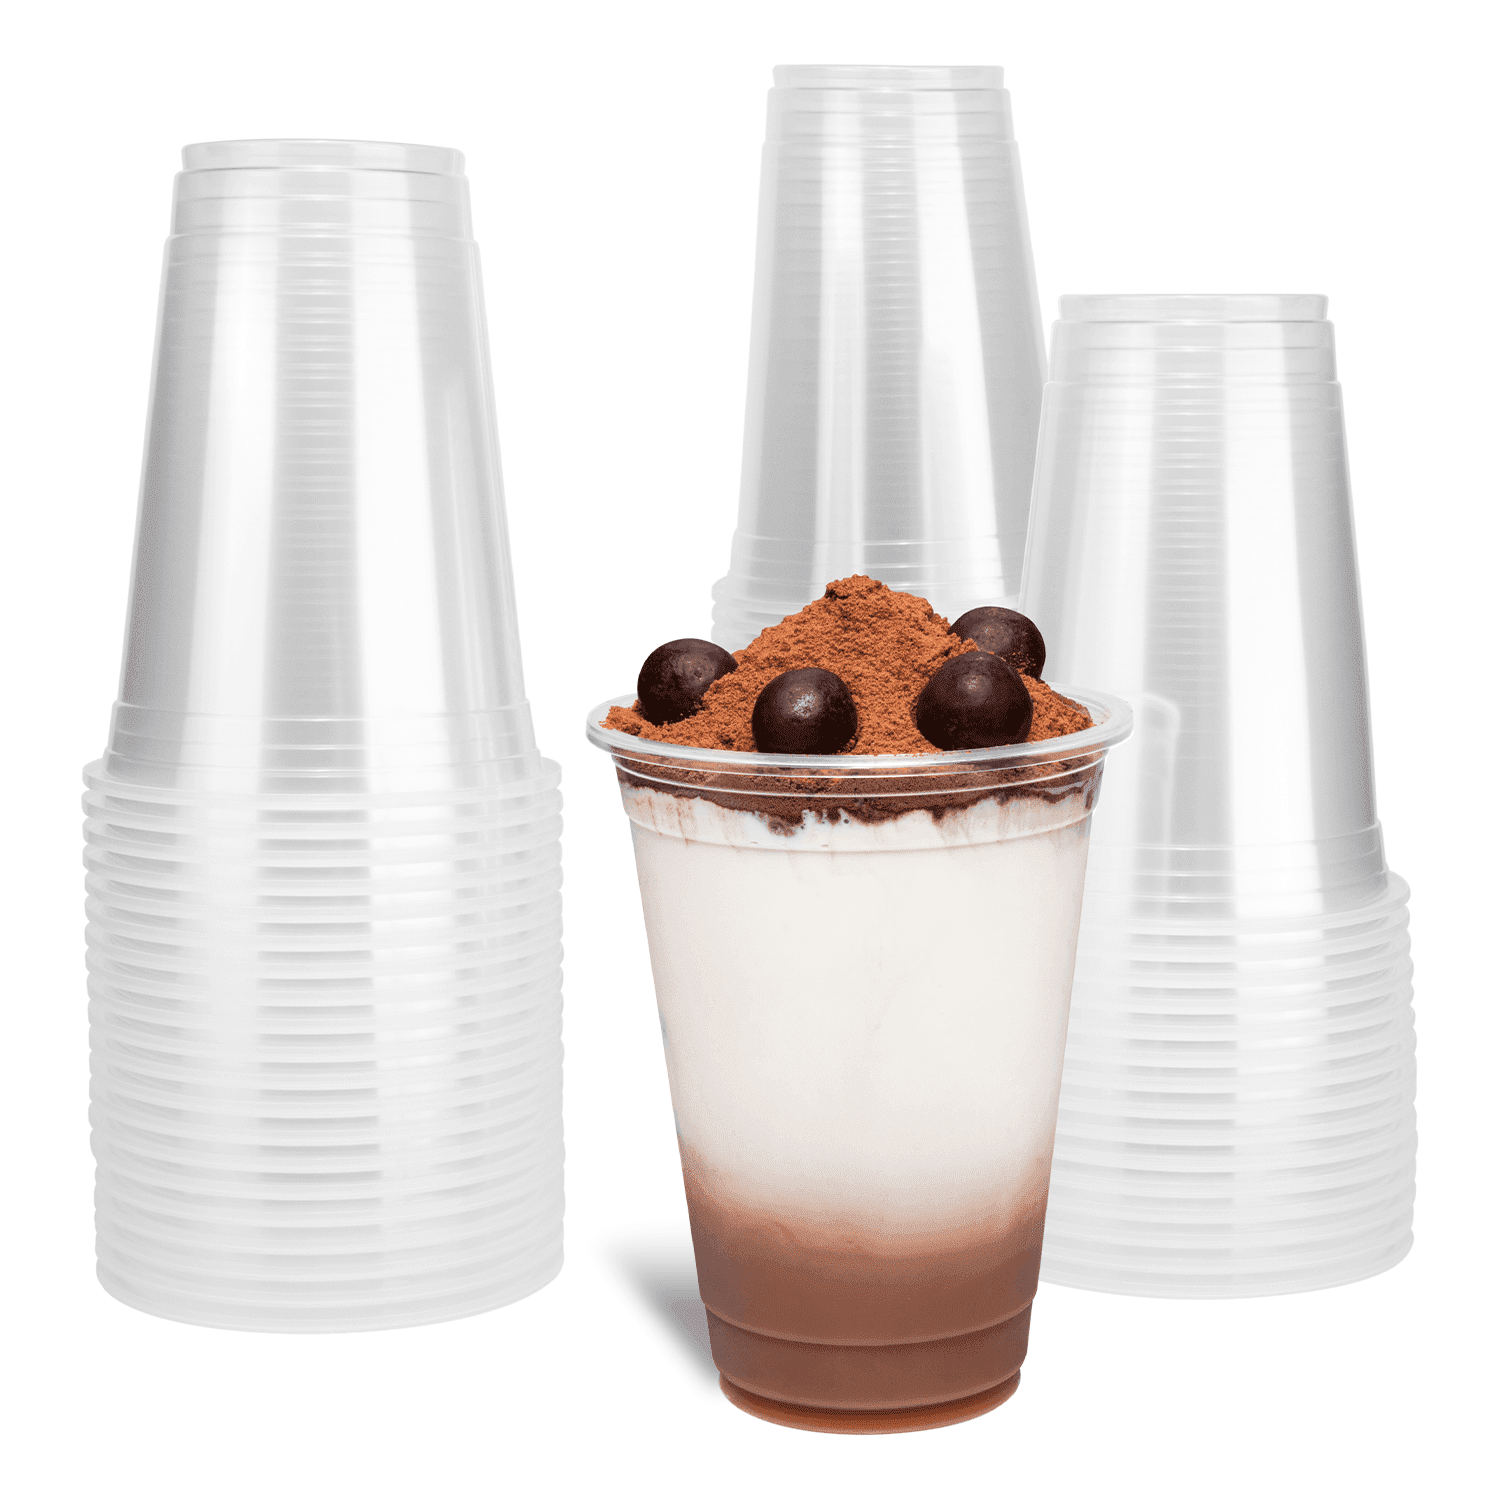 YOCUP 16 oz Clear Round Bottom PP Plastic Cup (95mm rim) - 1000/Case